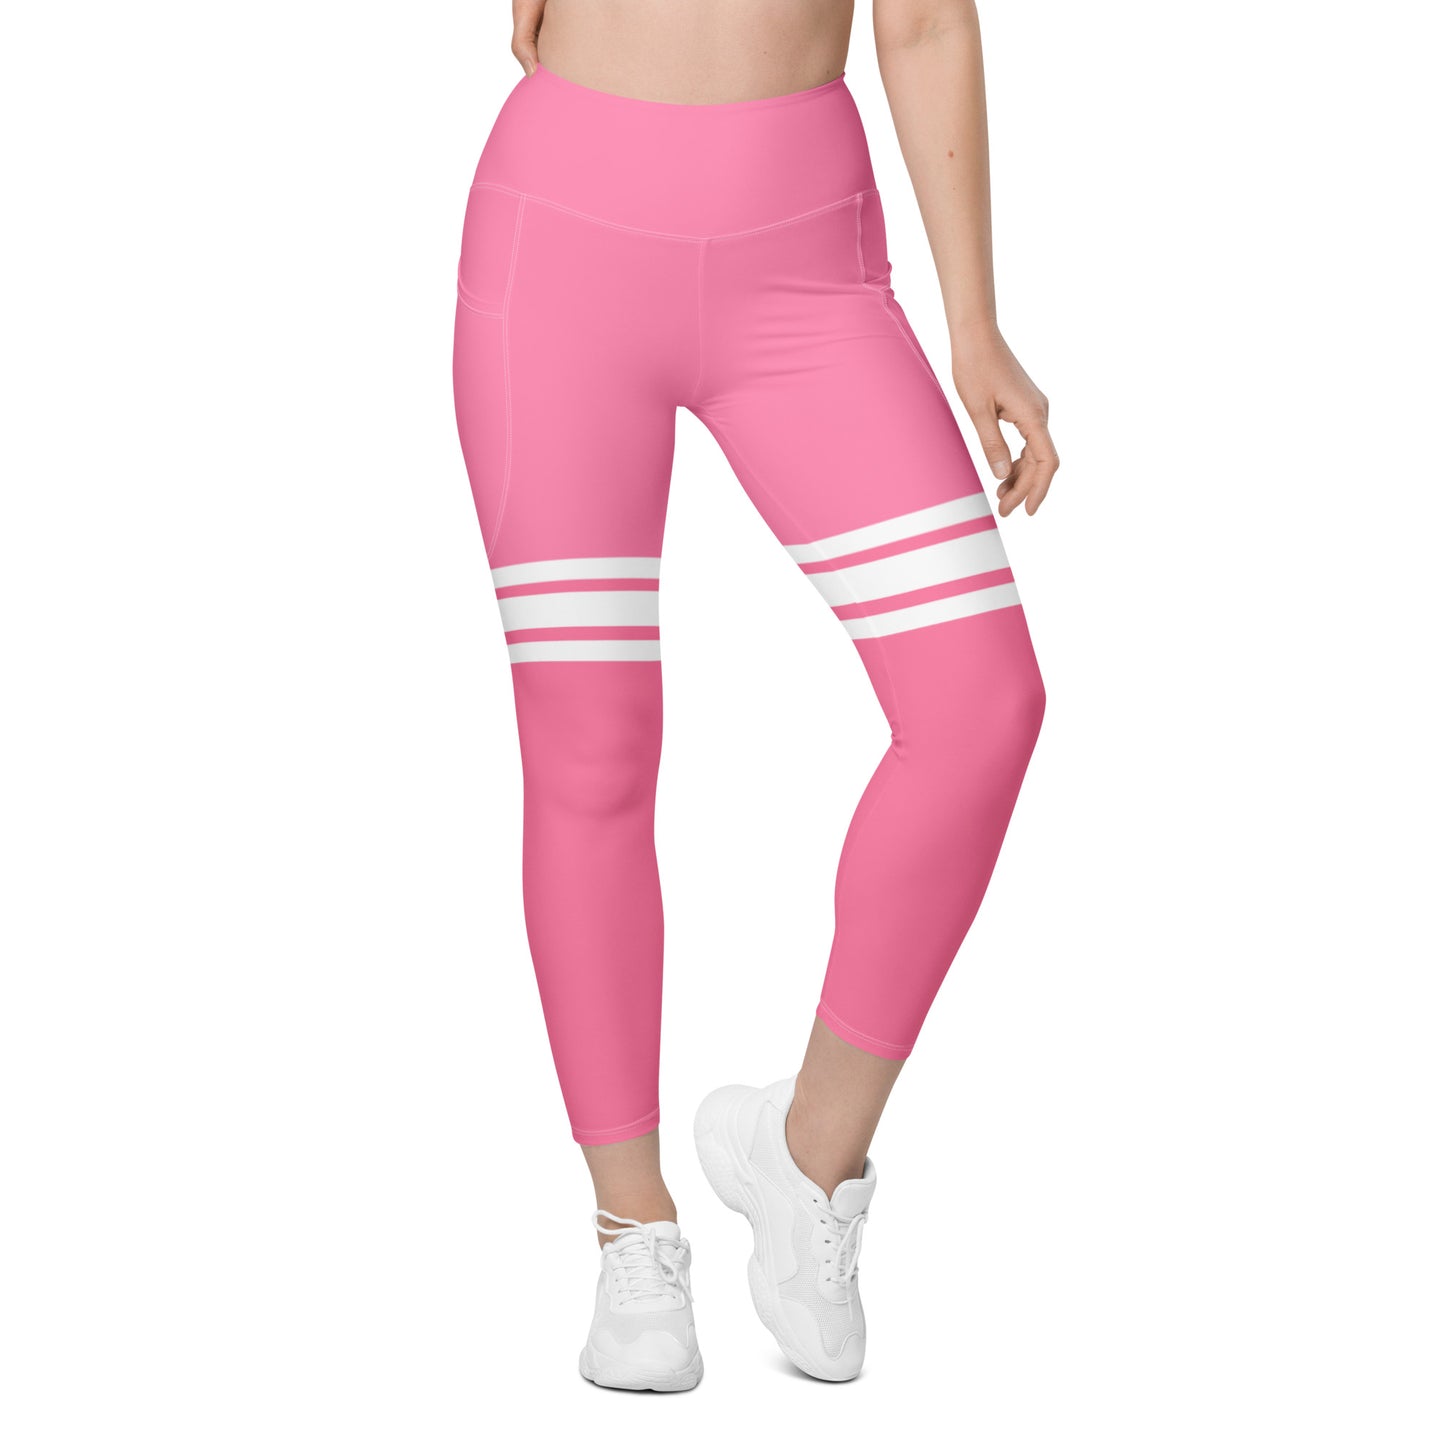 ELEVATED ESSENTIALS, THE PERFECT SIDE POCKET LEGGING THIGH HIGH HOT PINK